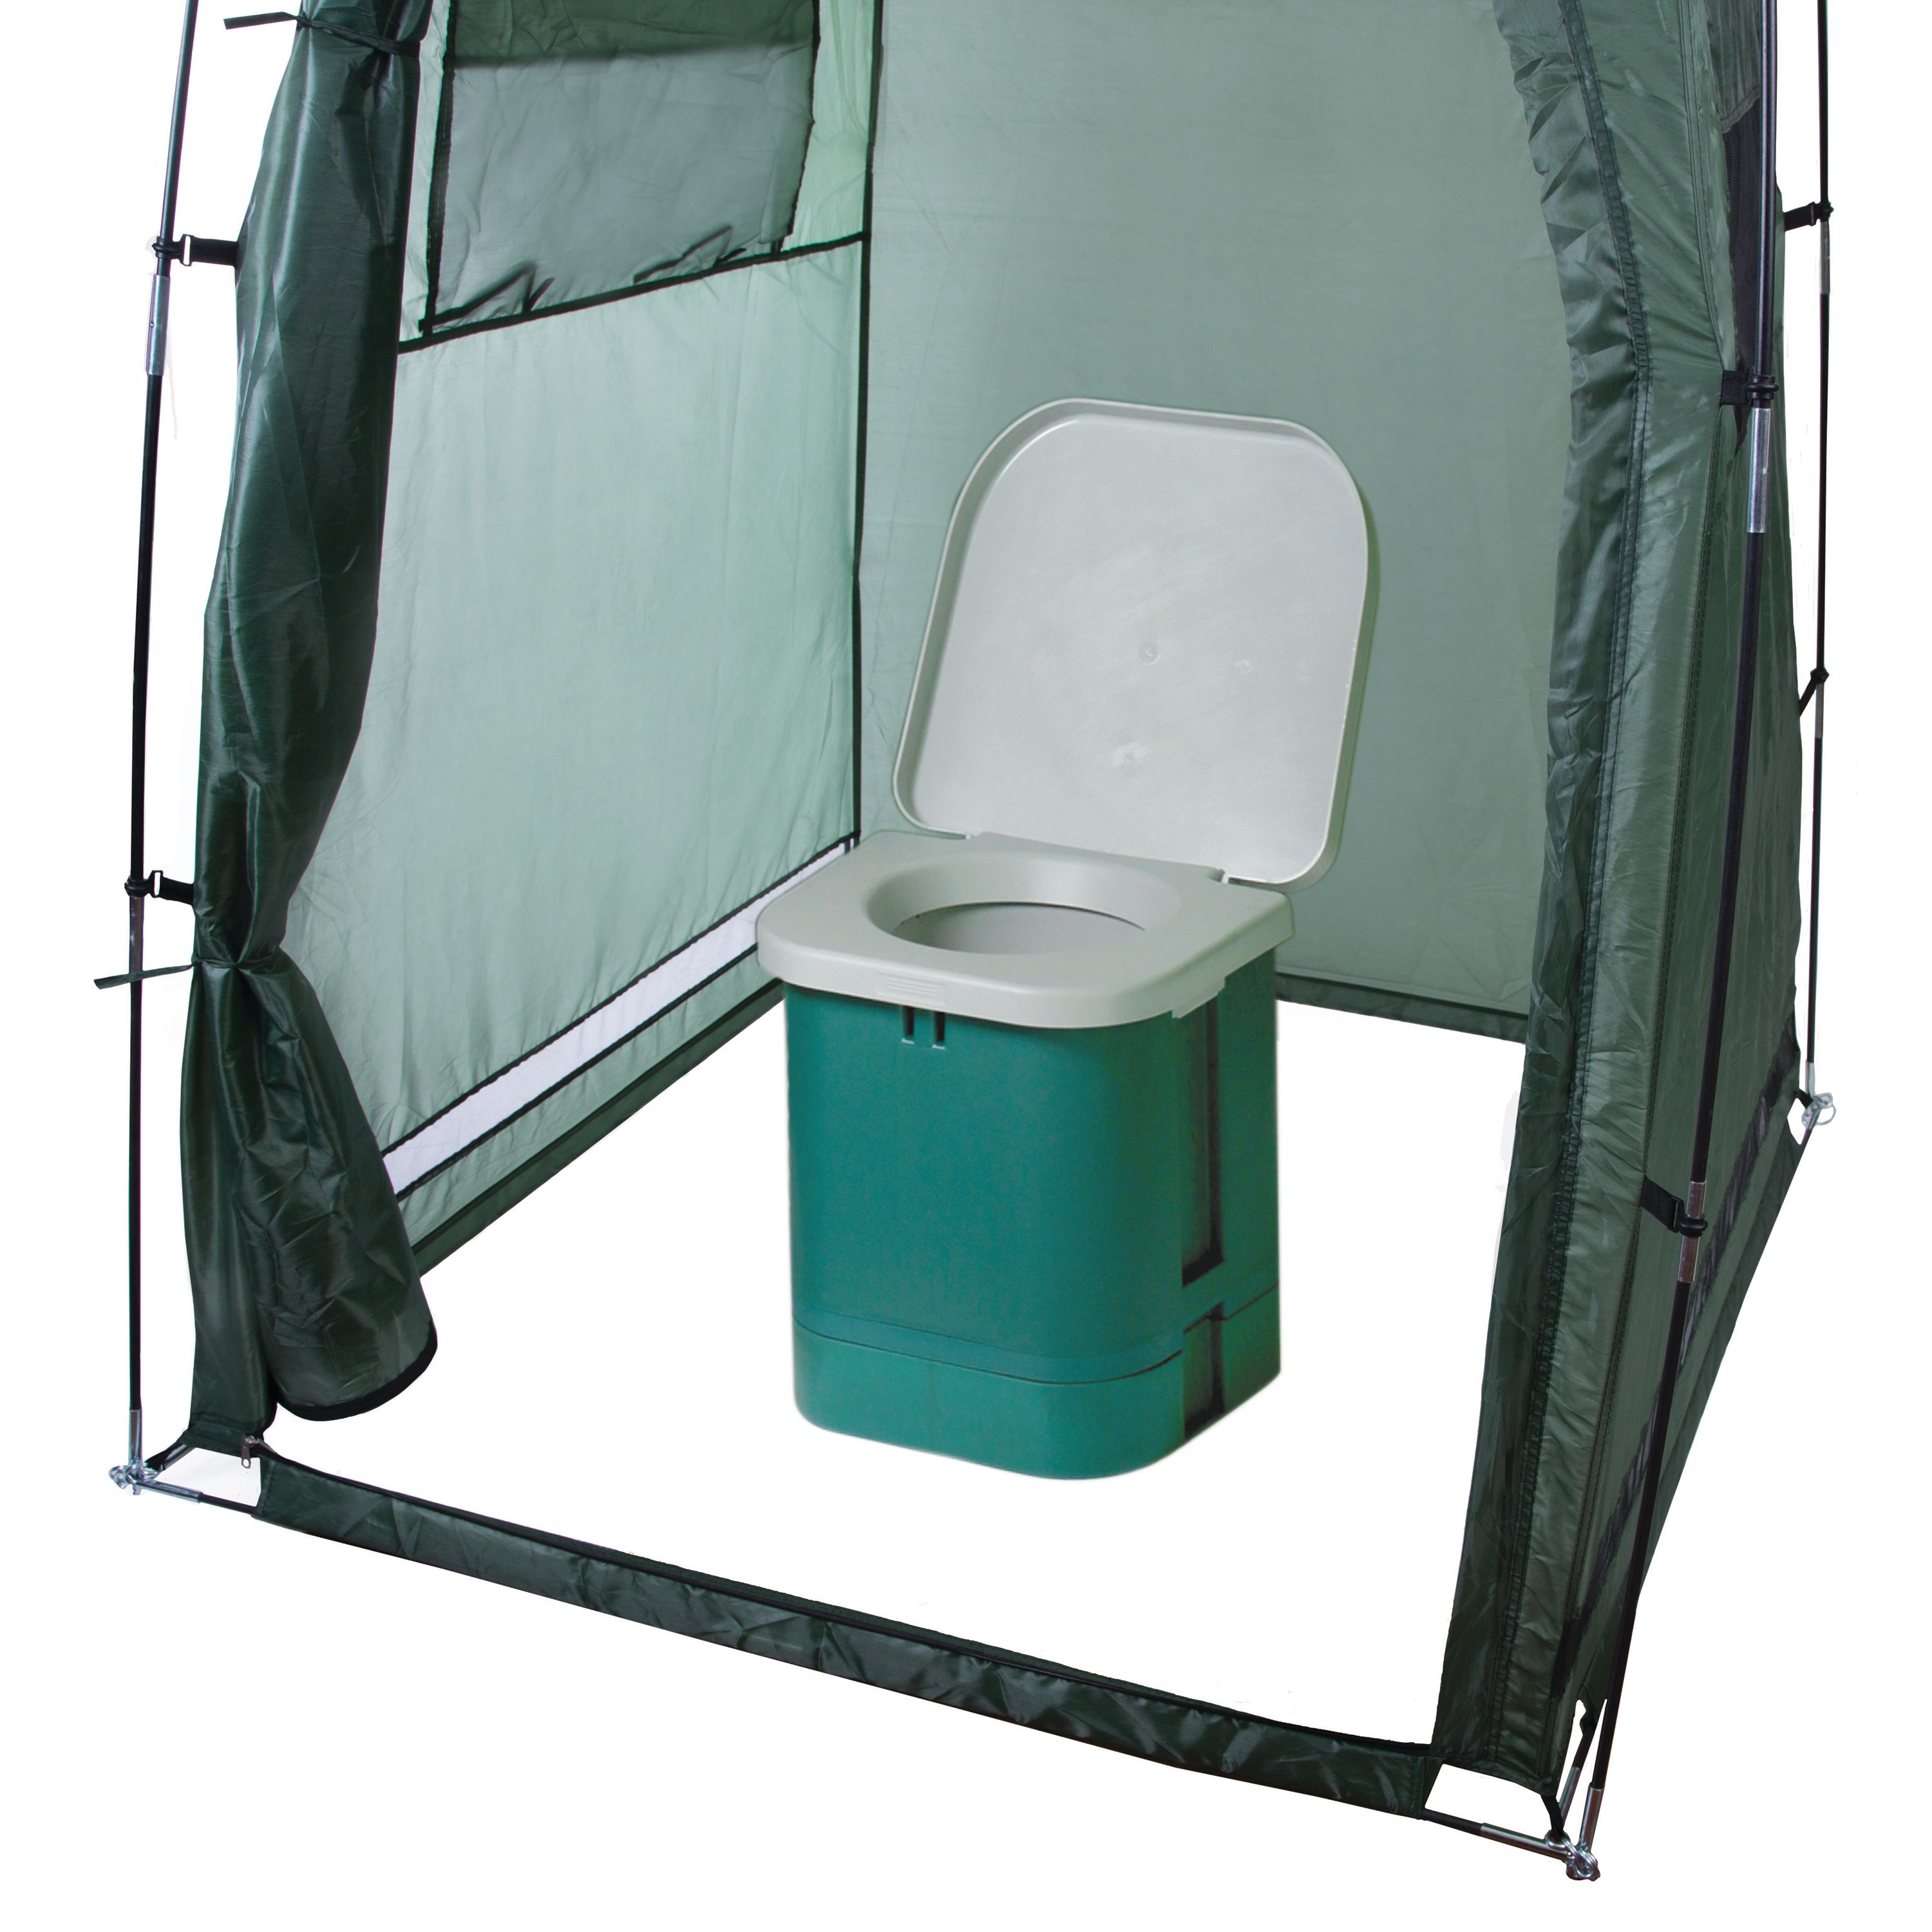 Stansport Cabana Privacy Shelter - image 3 of 4